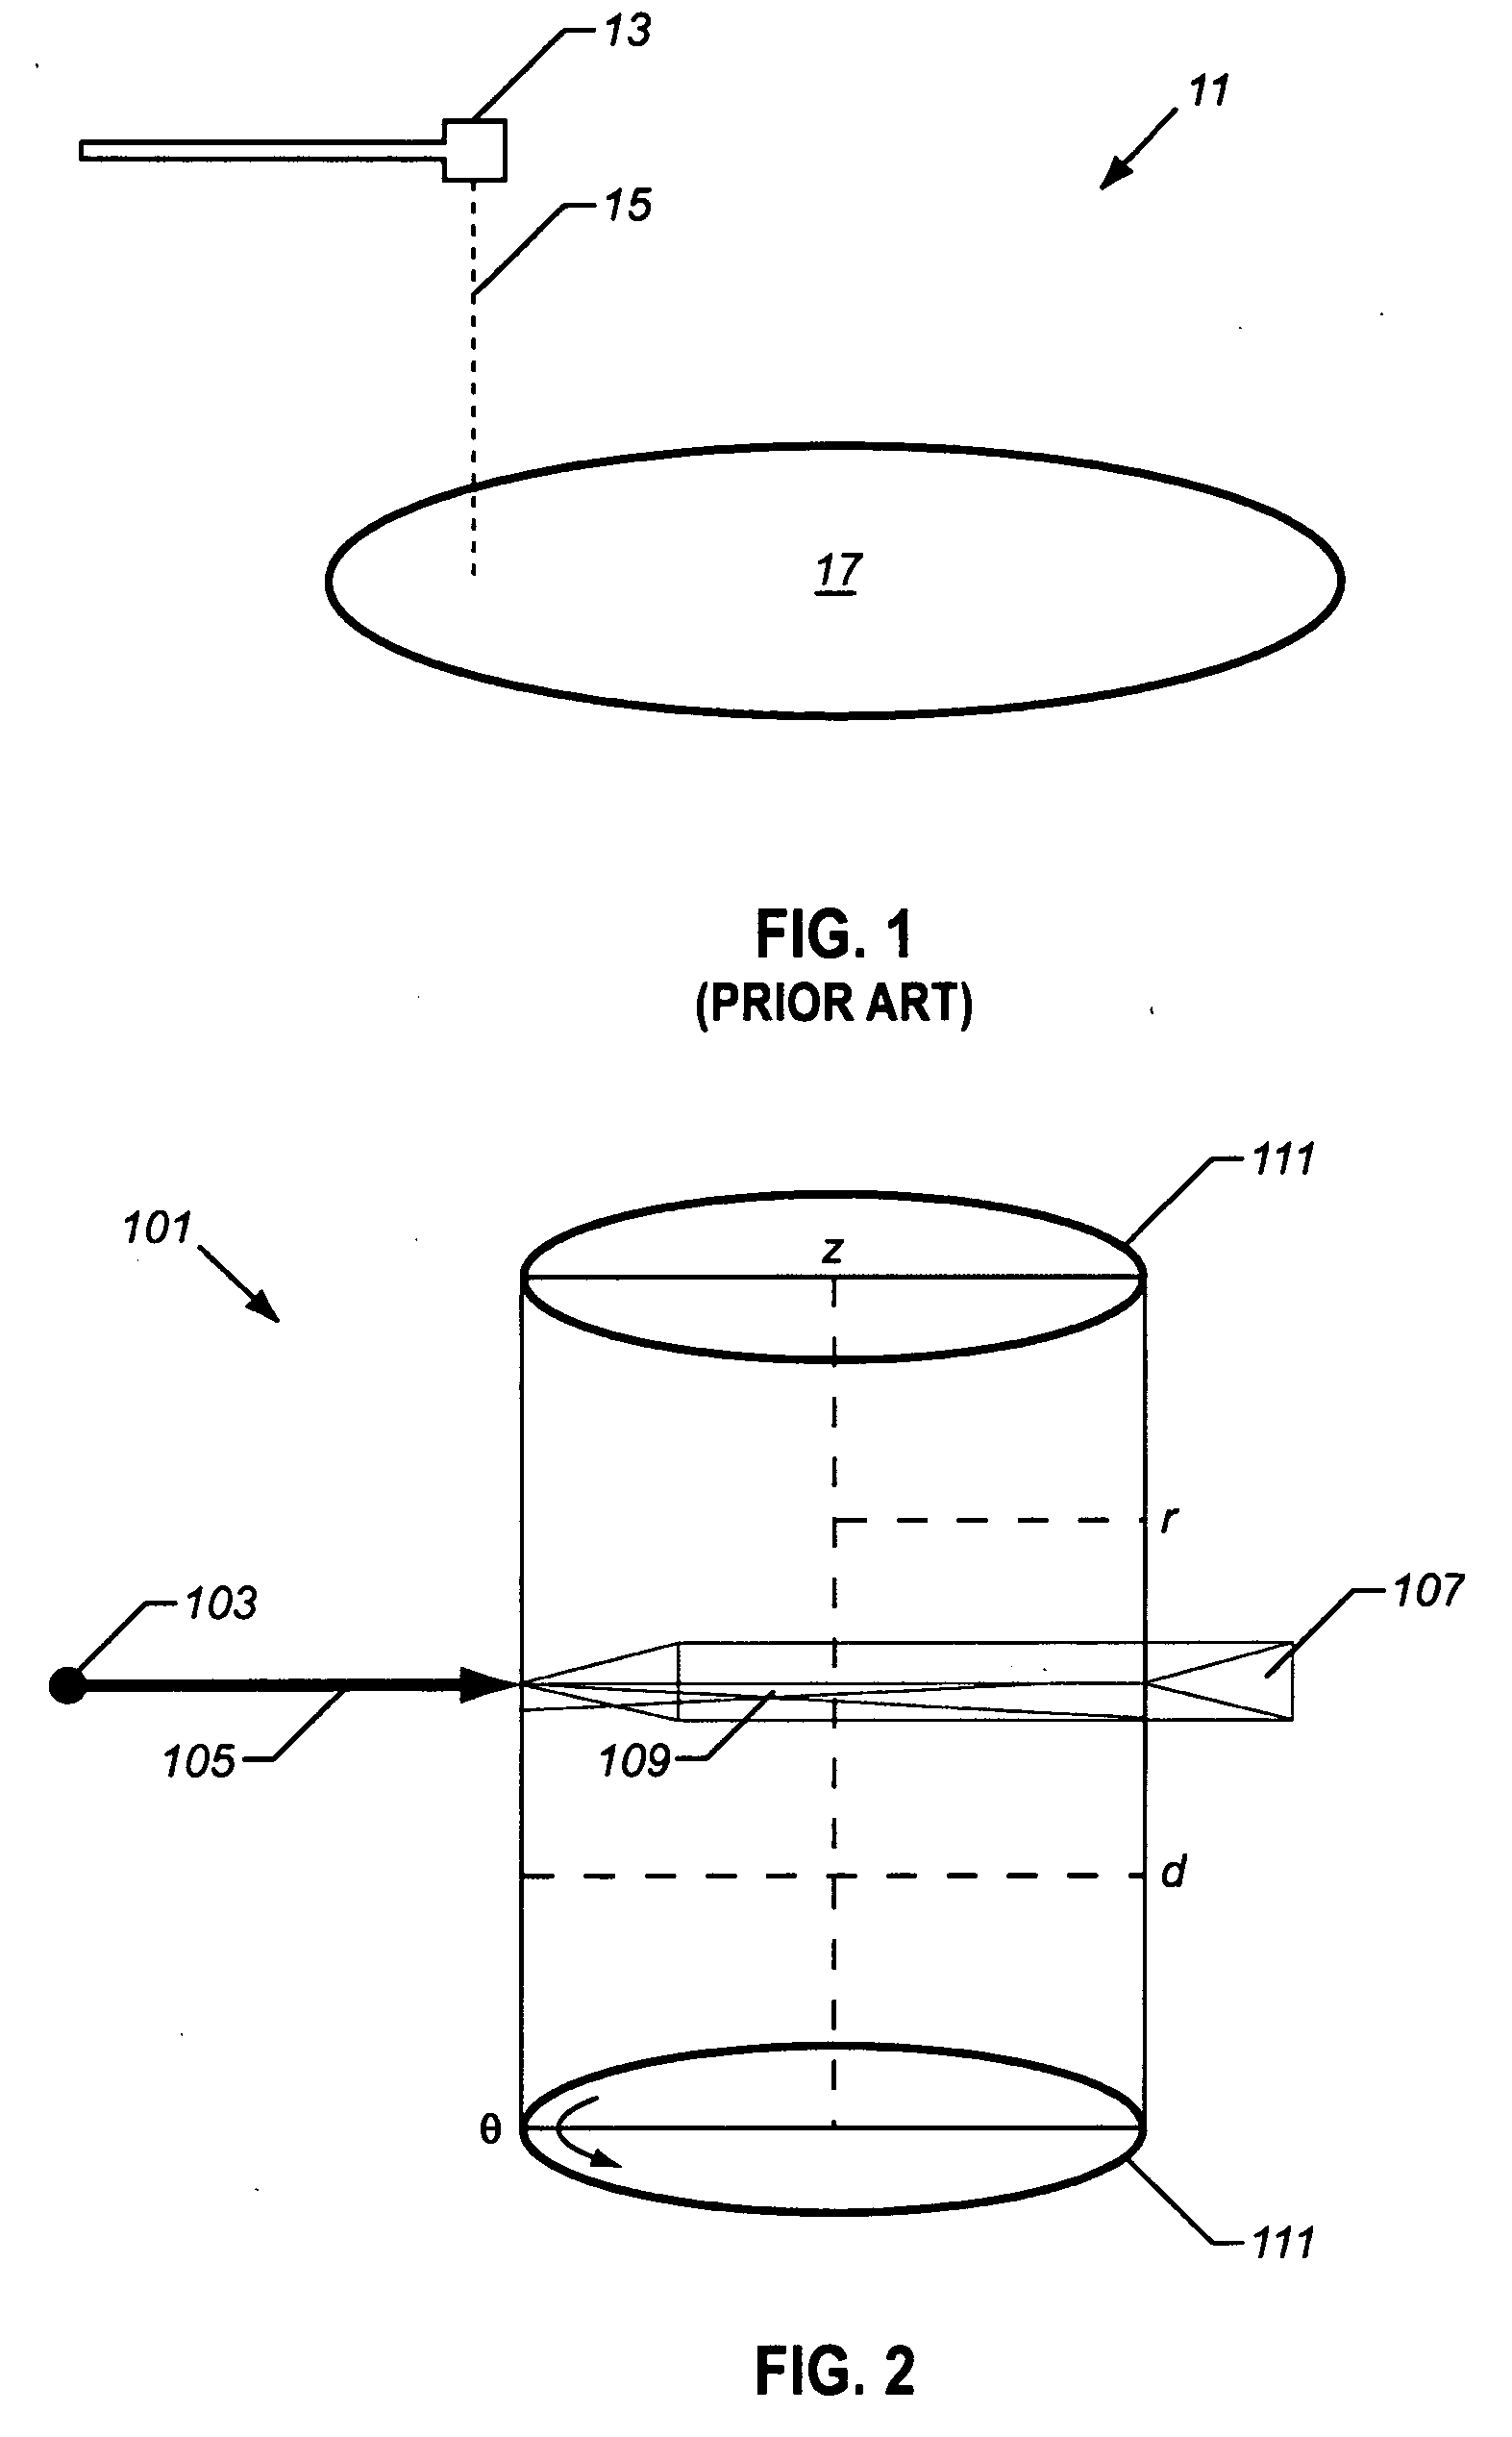 Multi-dimensional data signal and systems for manipulating the same